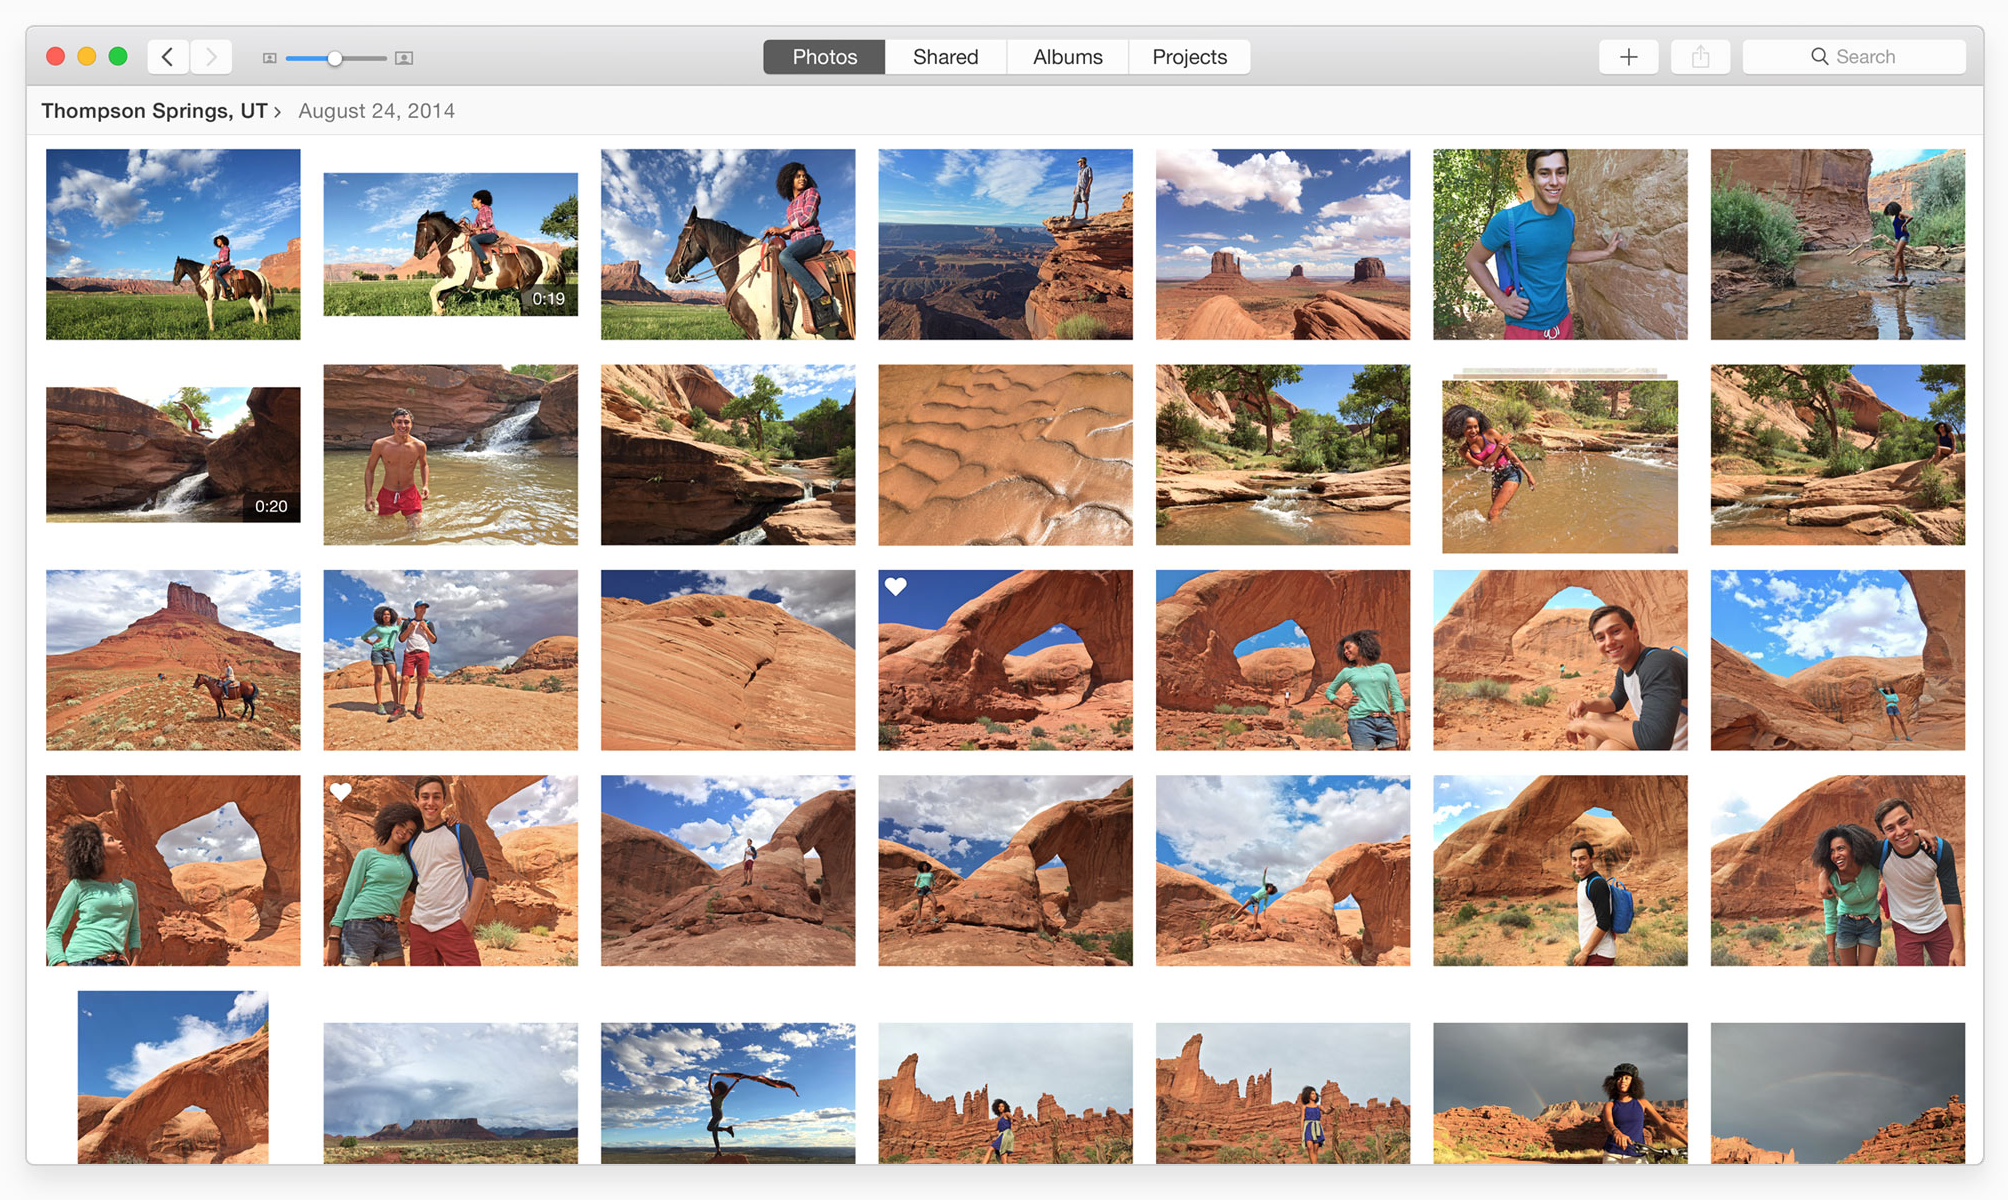 iphoto library manager can drag all events and albums